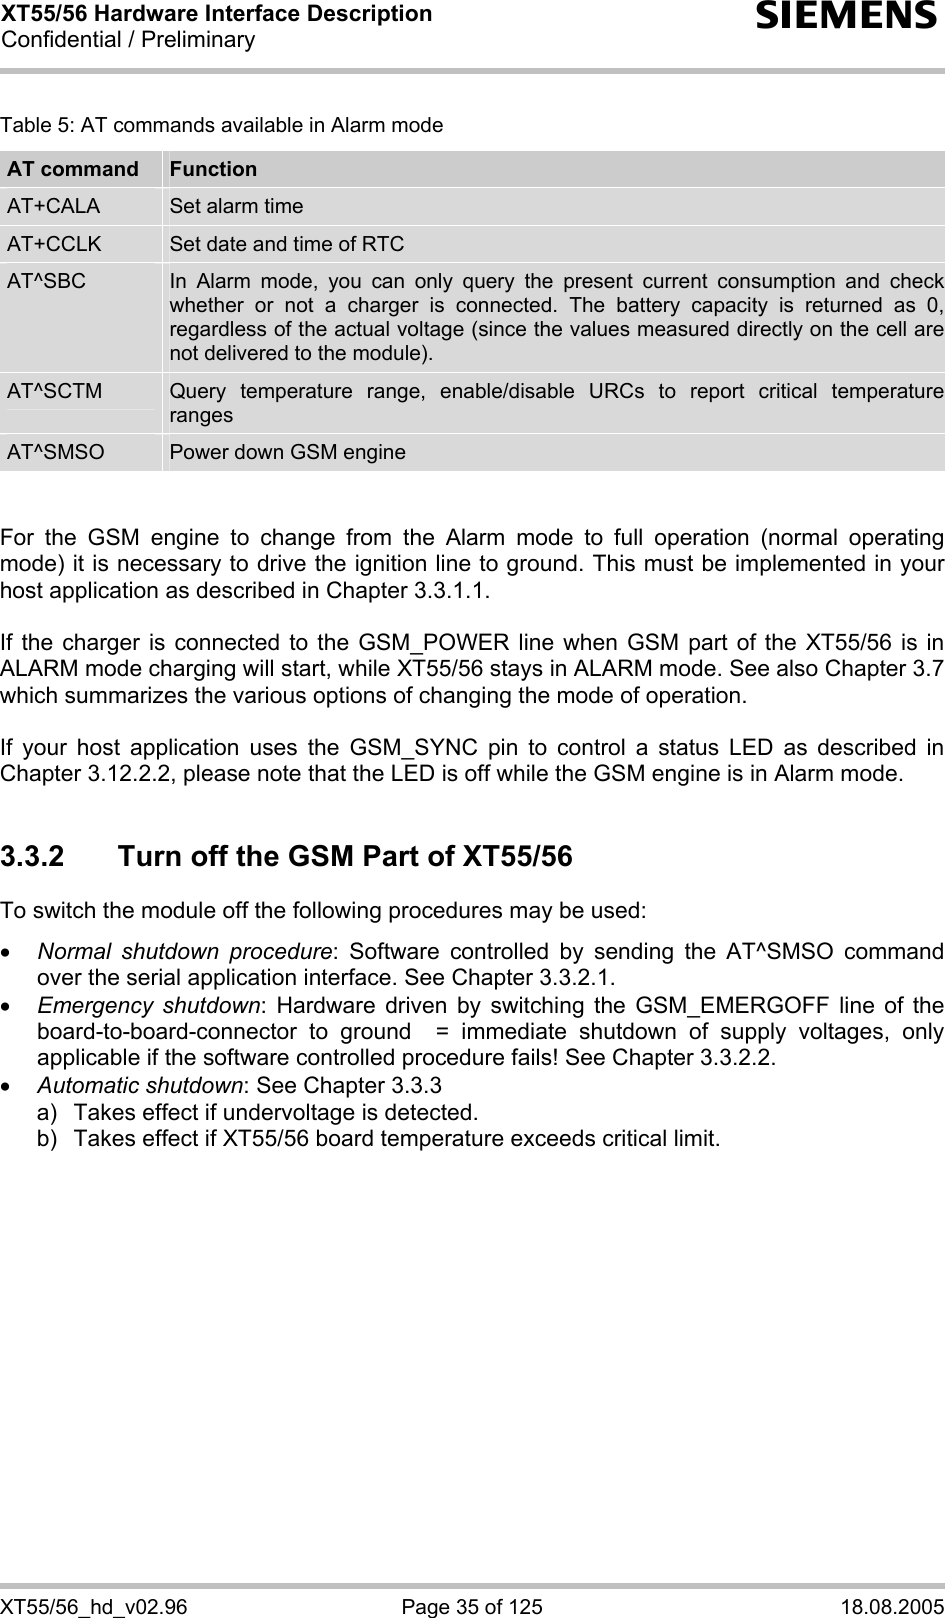 XT55/56 Hardware Interface Description Confidential / Preliminary s XT55/56_hd_v02.96  Page 35 of 125  18.08.2005 Table 5: AT commands available in Alarm mode AT command  Function AT+CALA  Set alarm time AT+CCLK  Set date and time of RTC AT^SBC  In Alarm mode, you can only query the present current consumption and check whether or not a charger is connected. The battery capacity is returned as 0, regardless of the actual voltage (since the values measured directly on the cell are not delivered to the module). AT^SCTM  Query temperature range, enable/disable URCs to report critical temperature ranges AT^SMSO  Power down GSM engine   For the GSM engine to change from the Alarm mode to full operation (normal operating mode) it is necessary to drive the ignition line to ground. This must be implemented in your host application as described in Chapter 3.3.1.1.  If the charger is connected to the GSM_POWER line when GSM part of the XT55/56 is in ALARM mode charging will start, while XT55/56 stays in ALARM mode. See also Chapter 3.7 which summarizes the various options of changing the mode of operation.  If your host application uses the GSM_SYNC pin to control a status LED as described in Chapter 3.12.2.2, please note that the LED is off while the GSM engine is in Alarm mode.  3.3.2  Turn off the GSM Part of XT55/56 To switch the module off the following procedures may be used:  • Normal shutdown procedure: Software controlled by sending the AT^SMSO command over the serial application interface. See Chapter 3.3.2.1. • Emergency shutdown: Hardware driven by switching the GSM_EMERGOFF line of the board-to-board-connector to ground  = immediate shutdown of supply voltages, only applicable if the software controlled procedure fails! See Chapter 3.3.2.2. • Automatic shutdown: See Chapter 3.3.3 a)   Takes effect if undervoltage is detected.  b)  Takes effect if XT55/56 board temperature exceeds critical limit.   